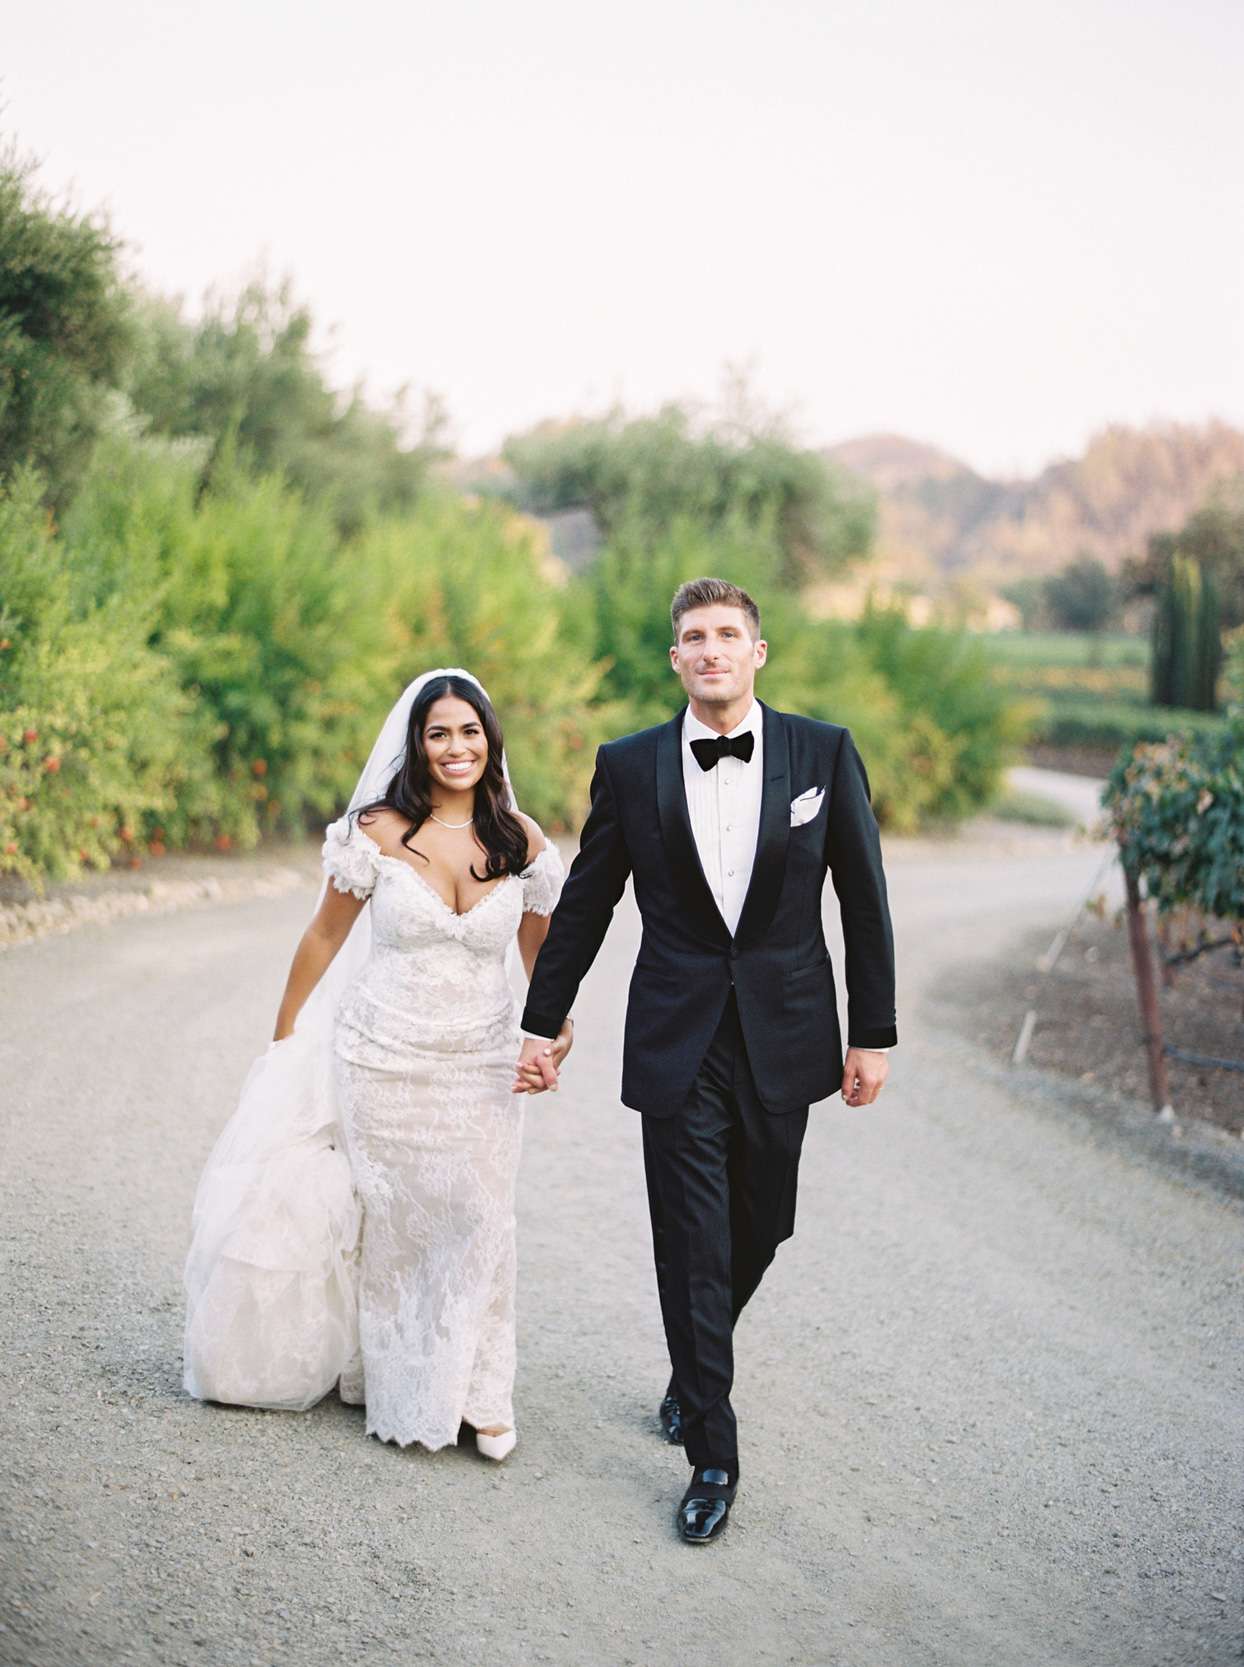 bride and groom smiling holding hands walking on gravel road